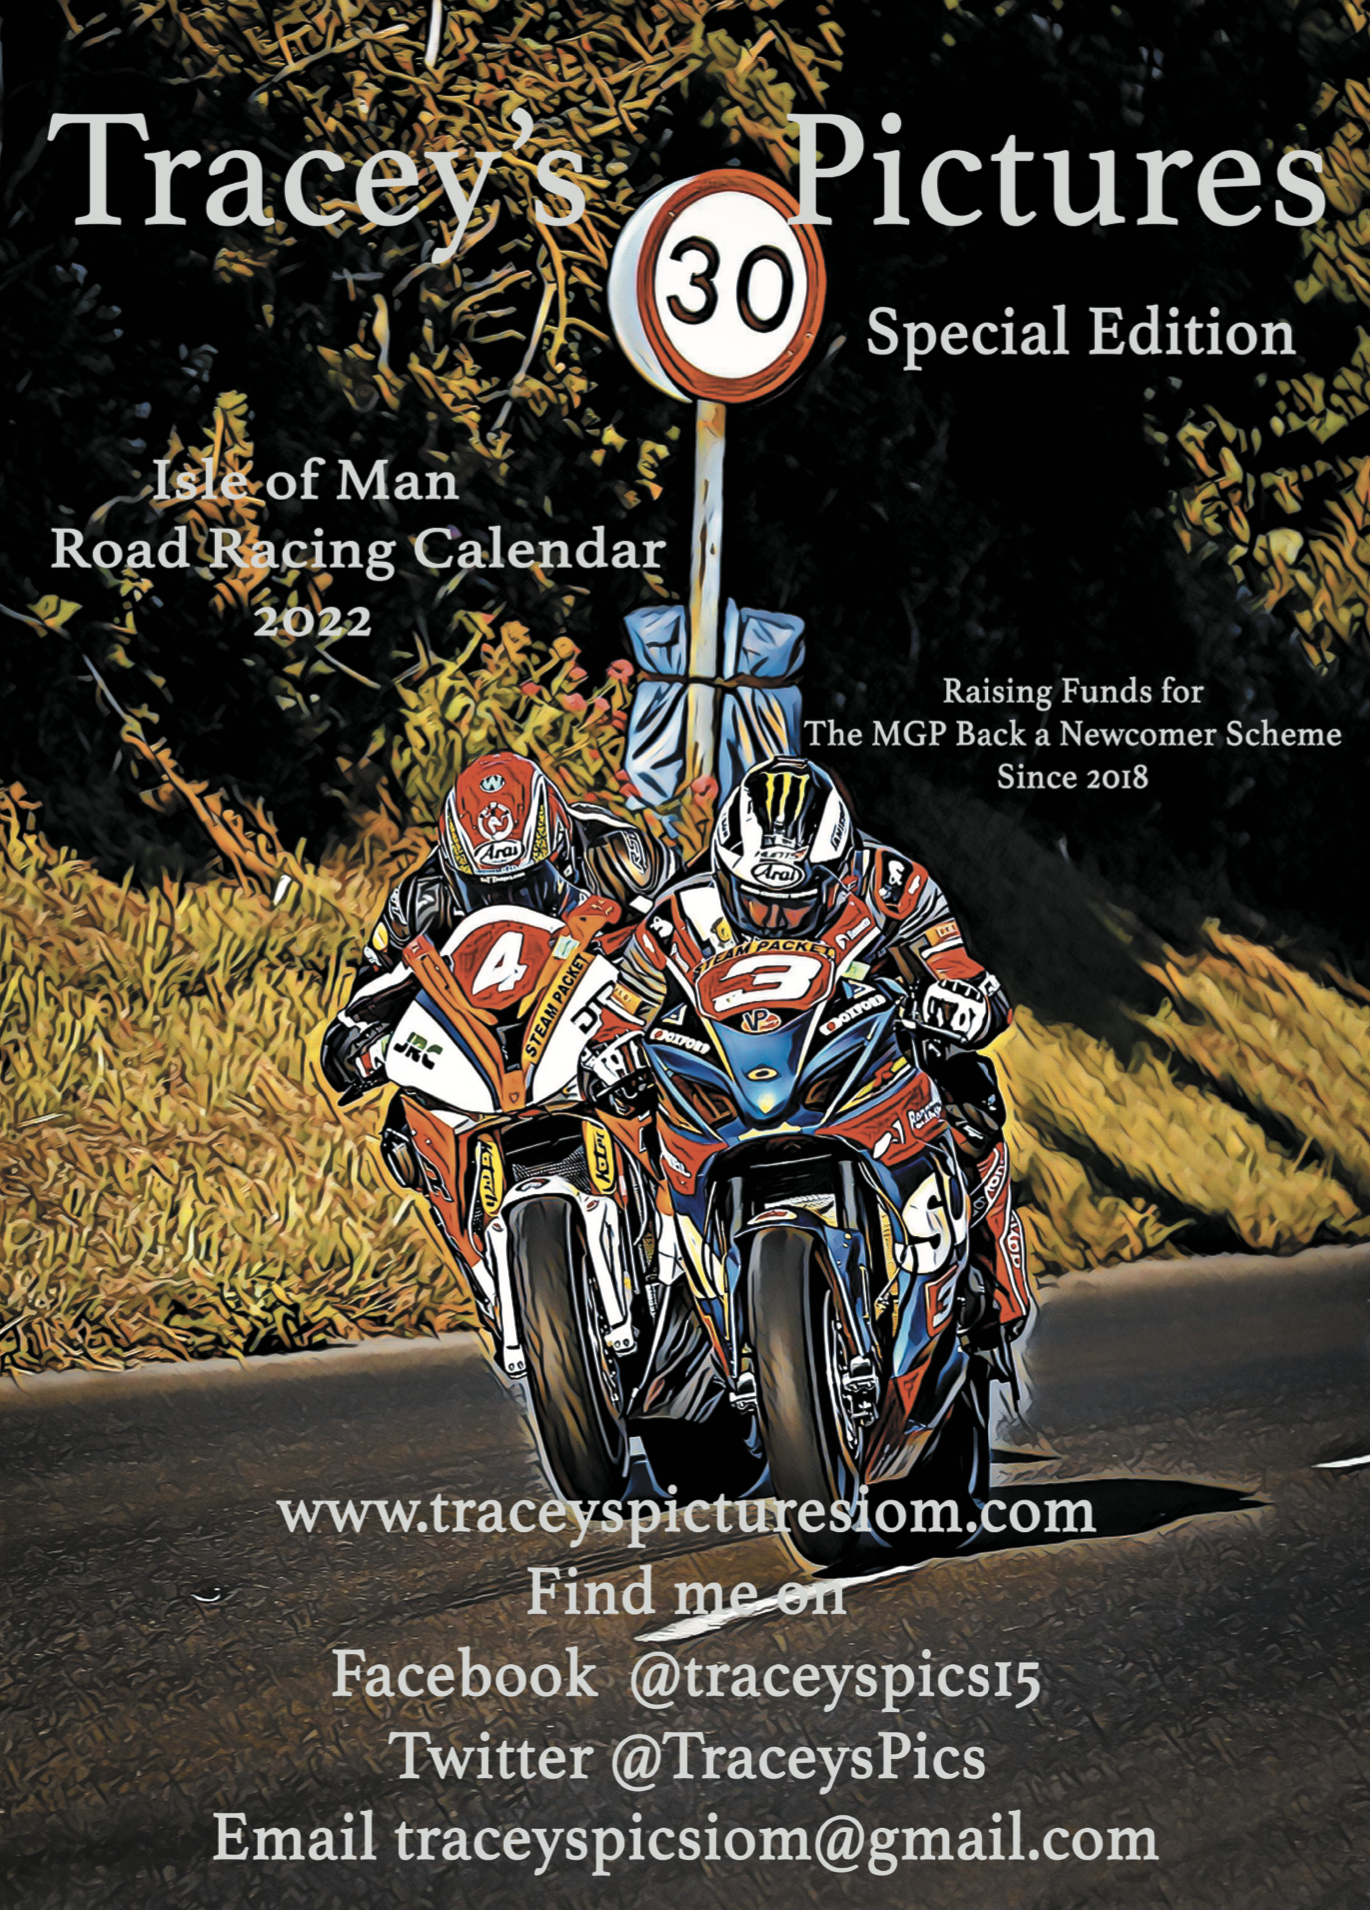 Motorcycle Road Racing Calendar 2022 Isle Of Man Road Racing Special Edition Calendar 2022 – Traceys Pictures